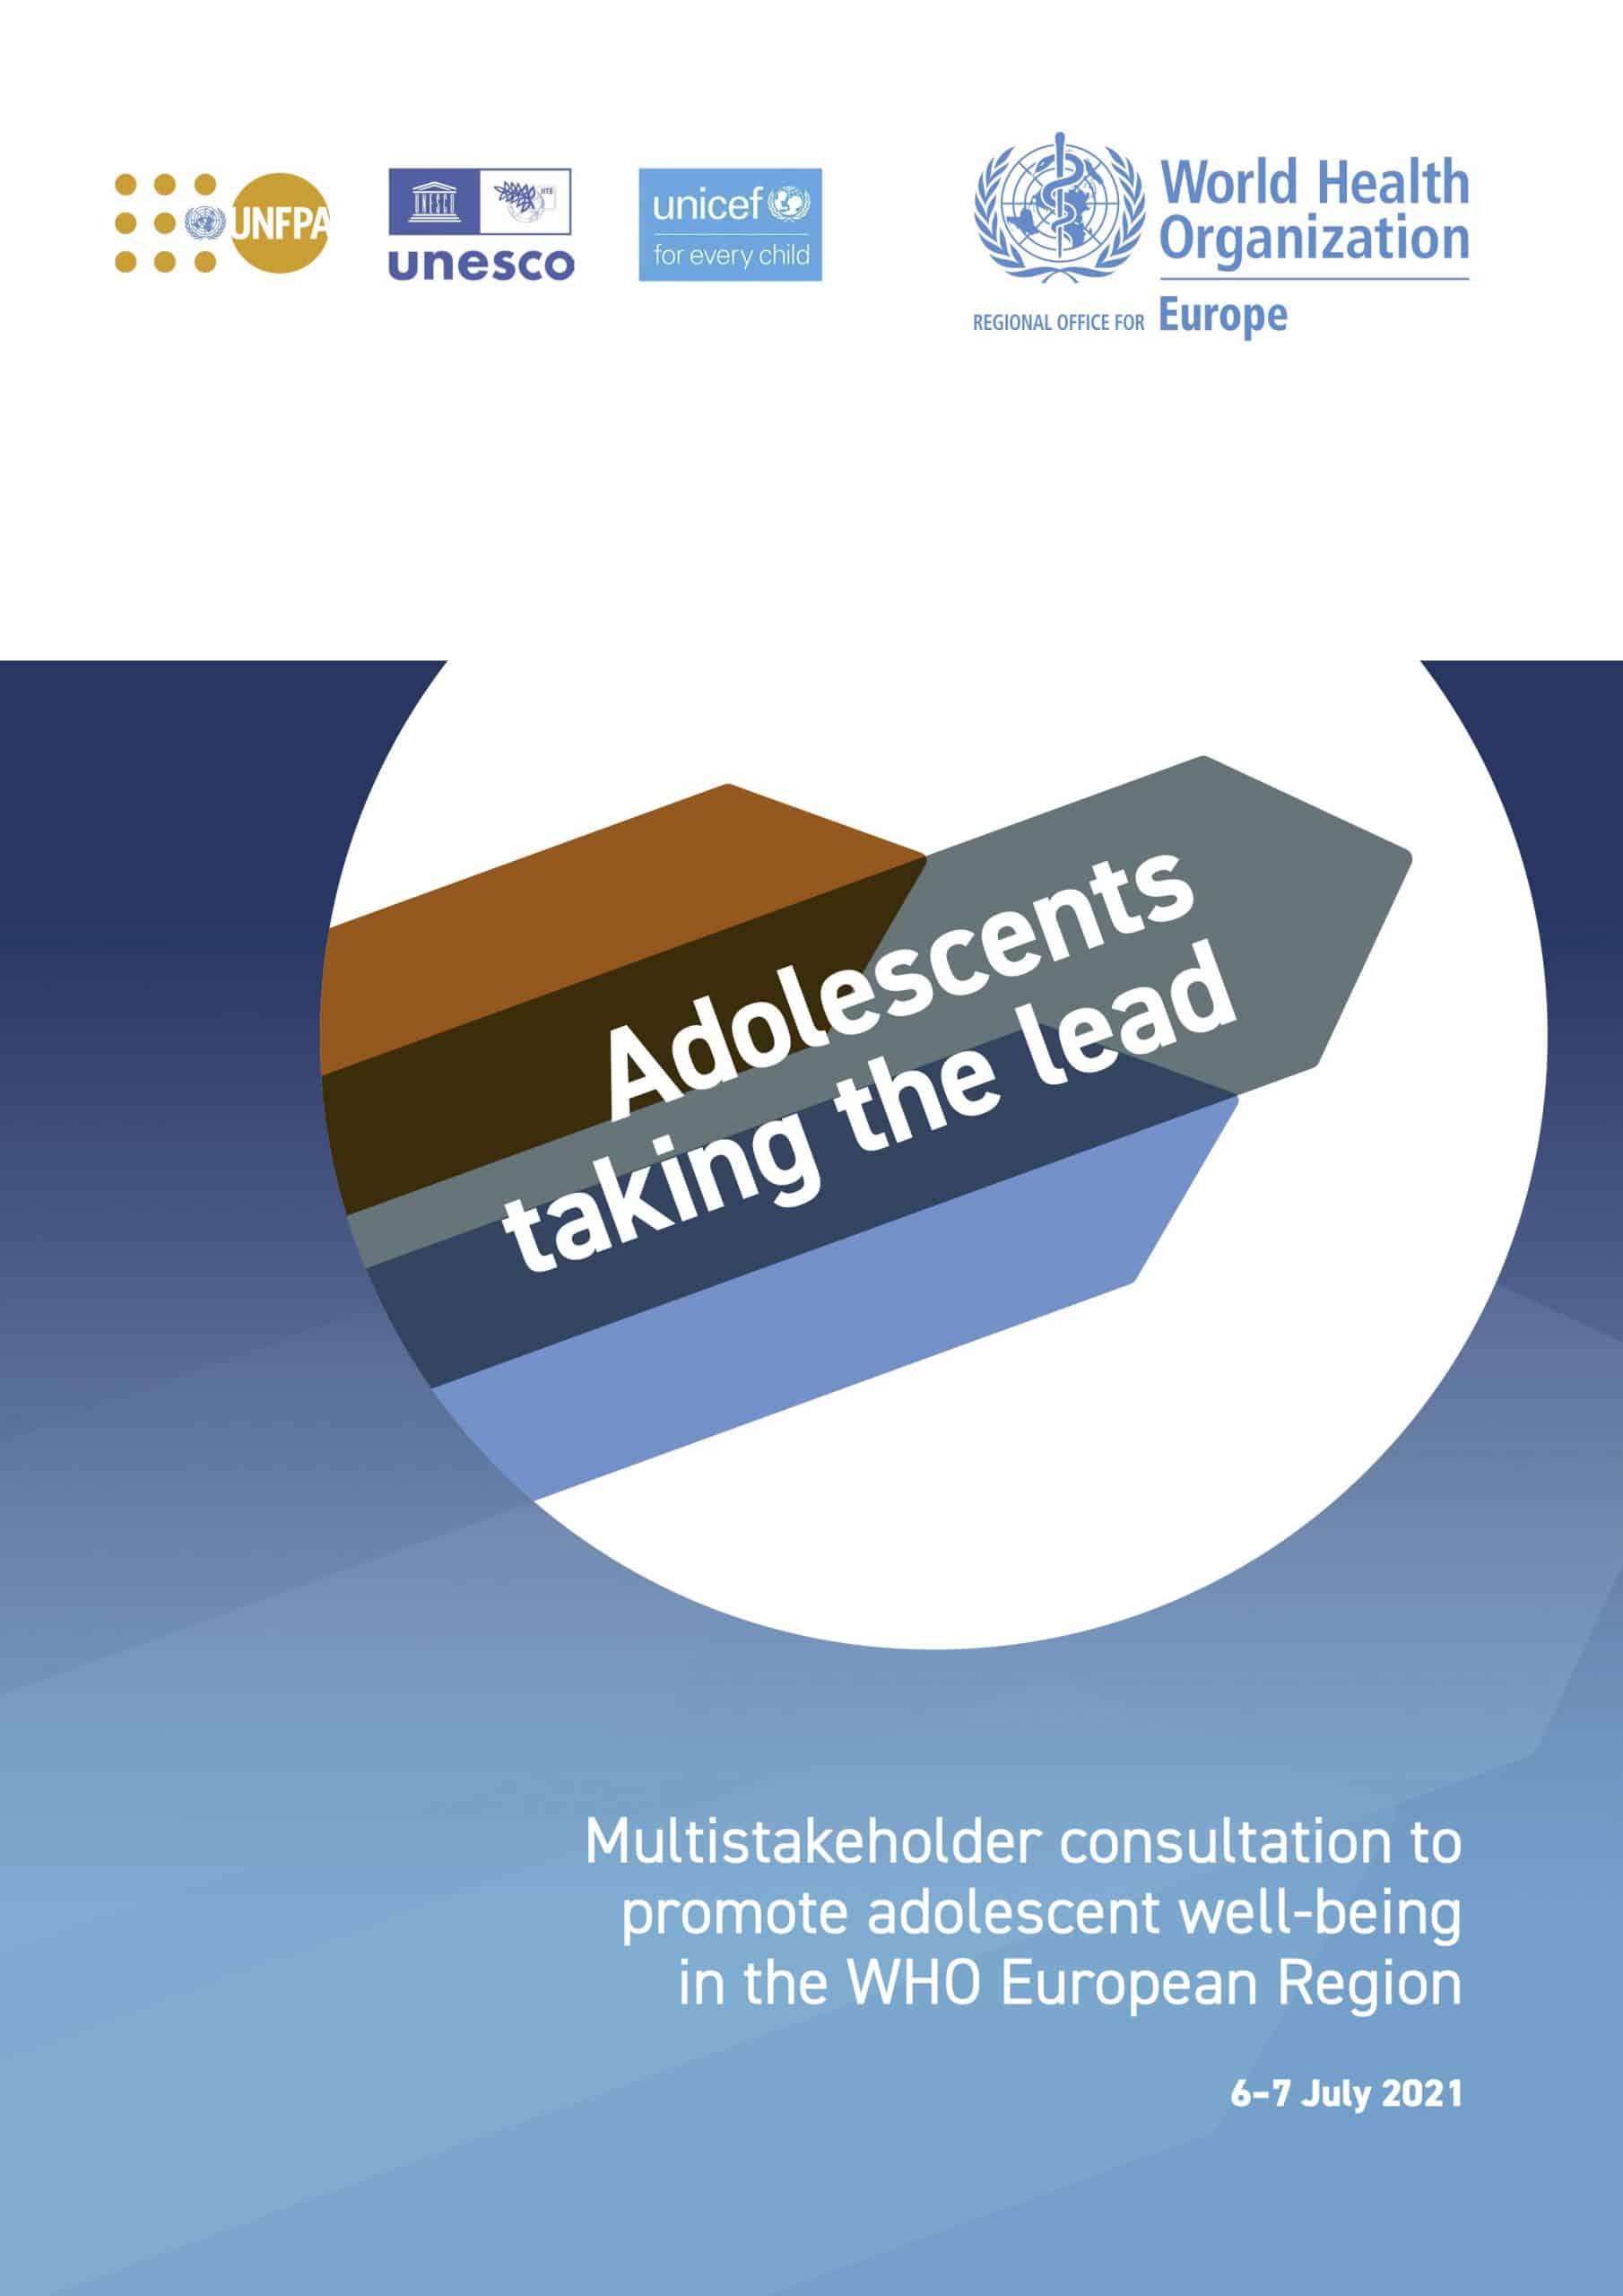 Adolescents taking the lead: Multistakeholder consultation to promote adolescent well-being in the WHO European Region